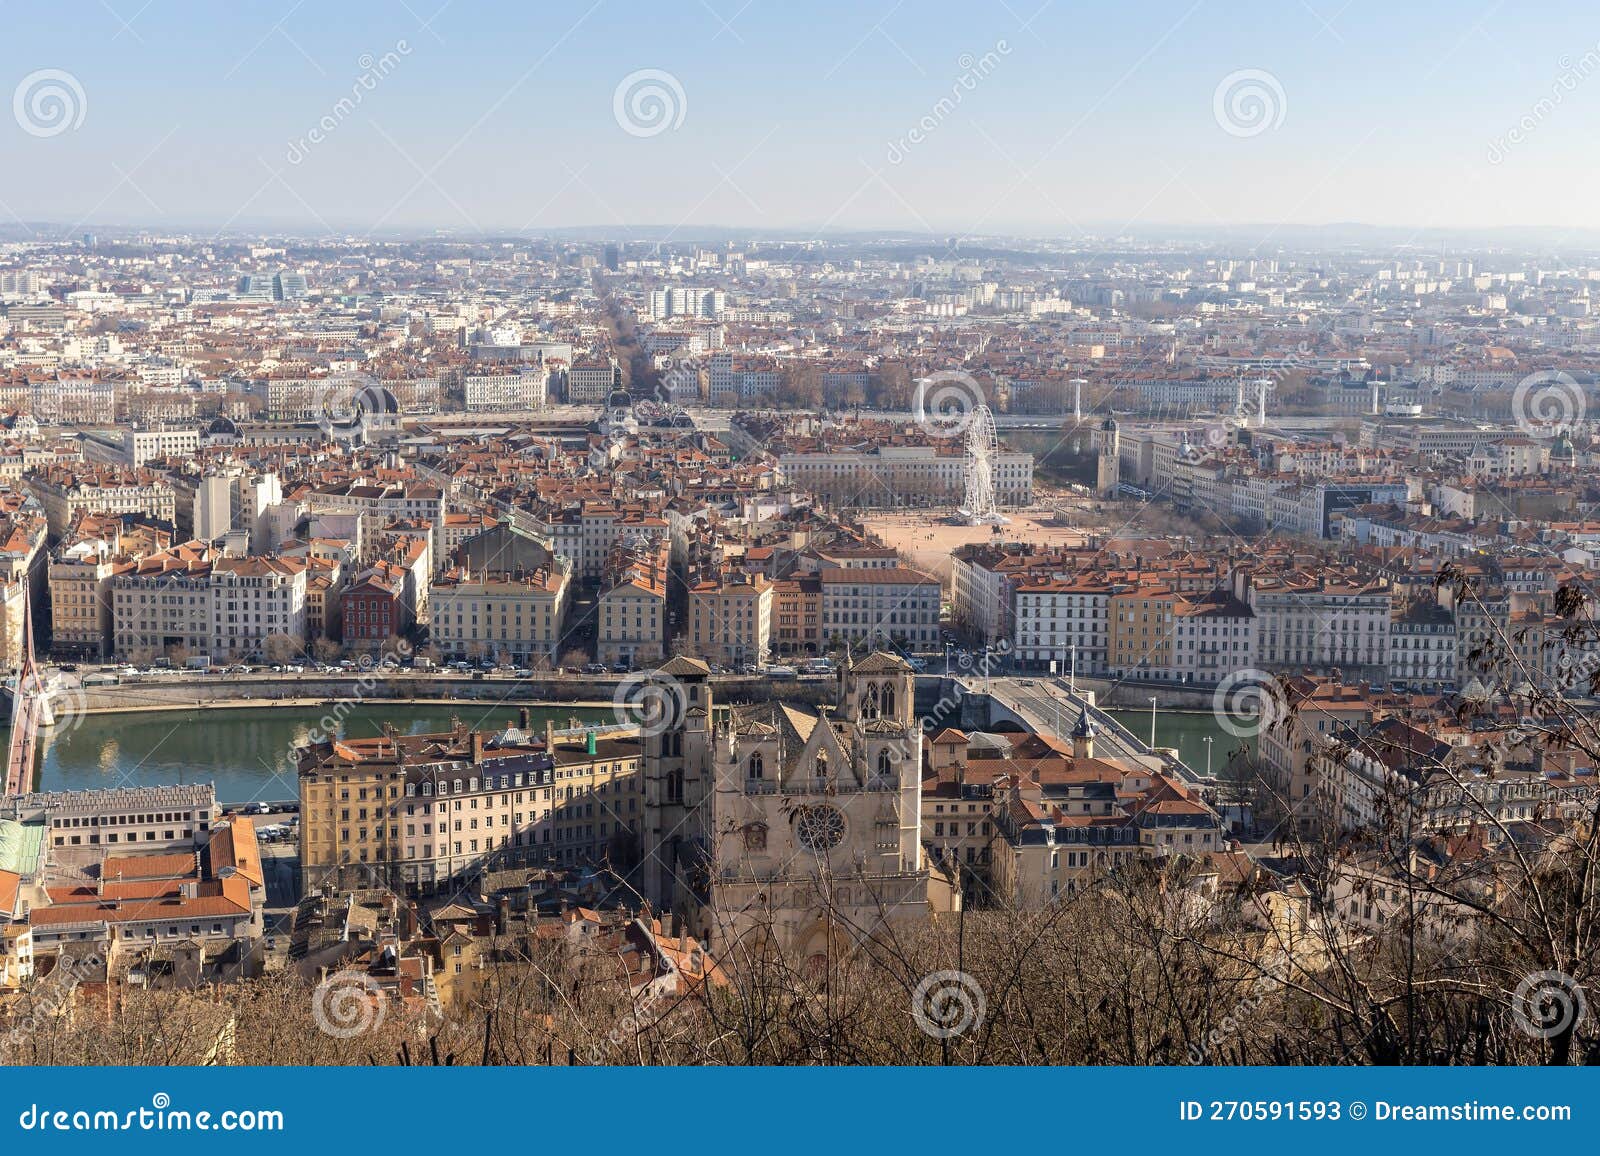 lyon panorama from top to city dowtown - france europe